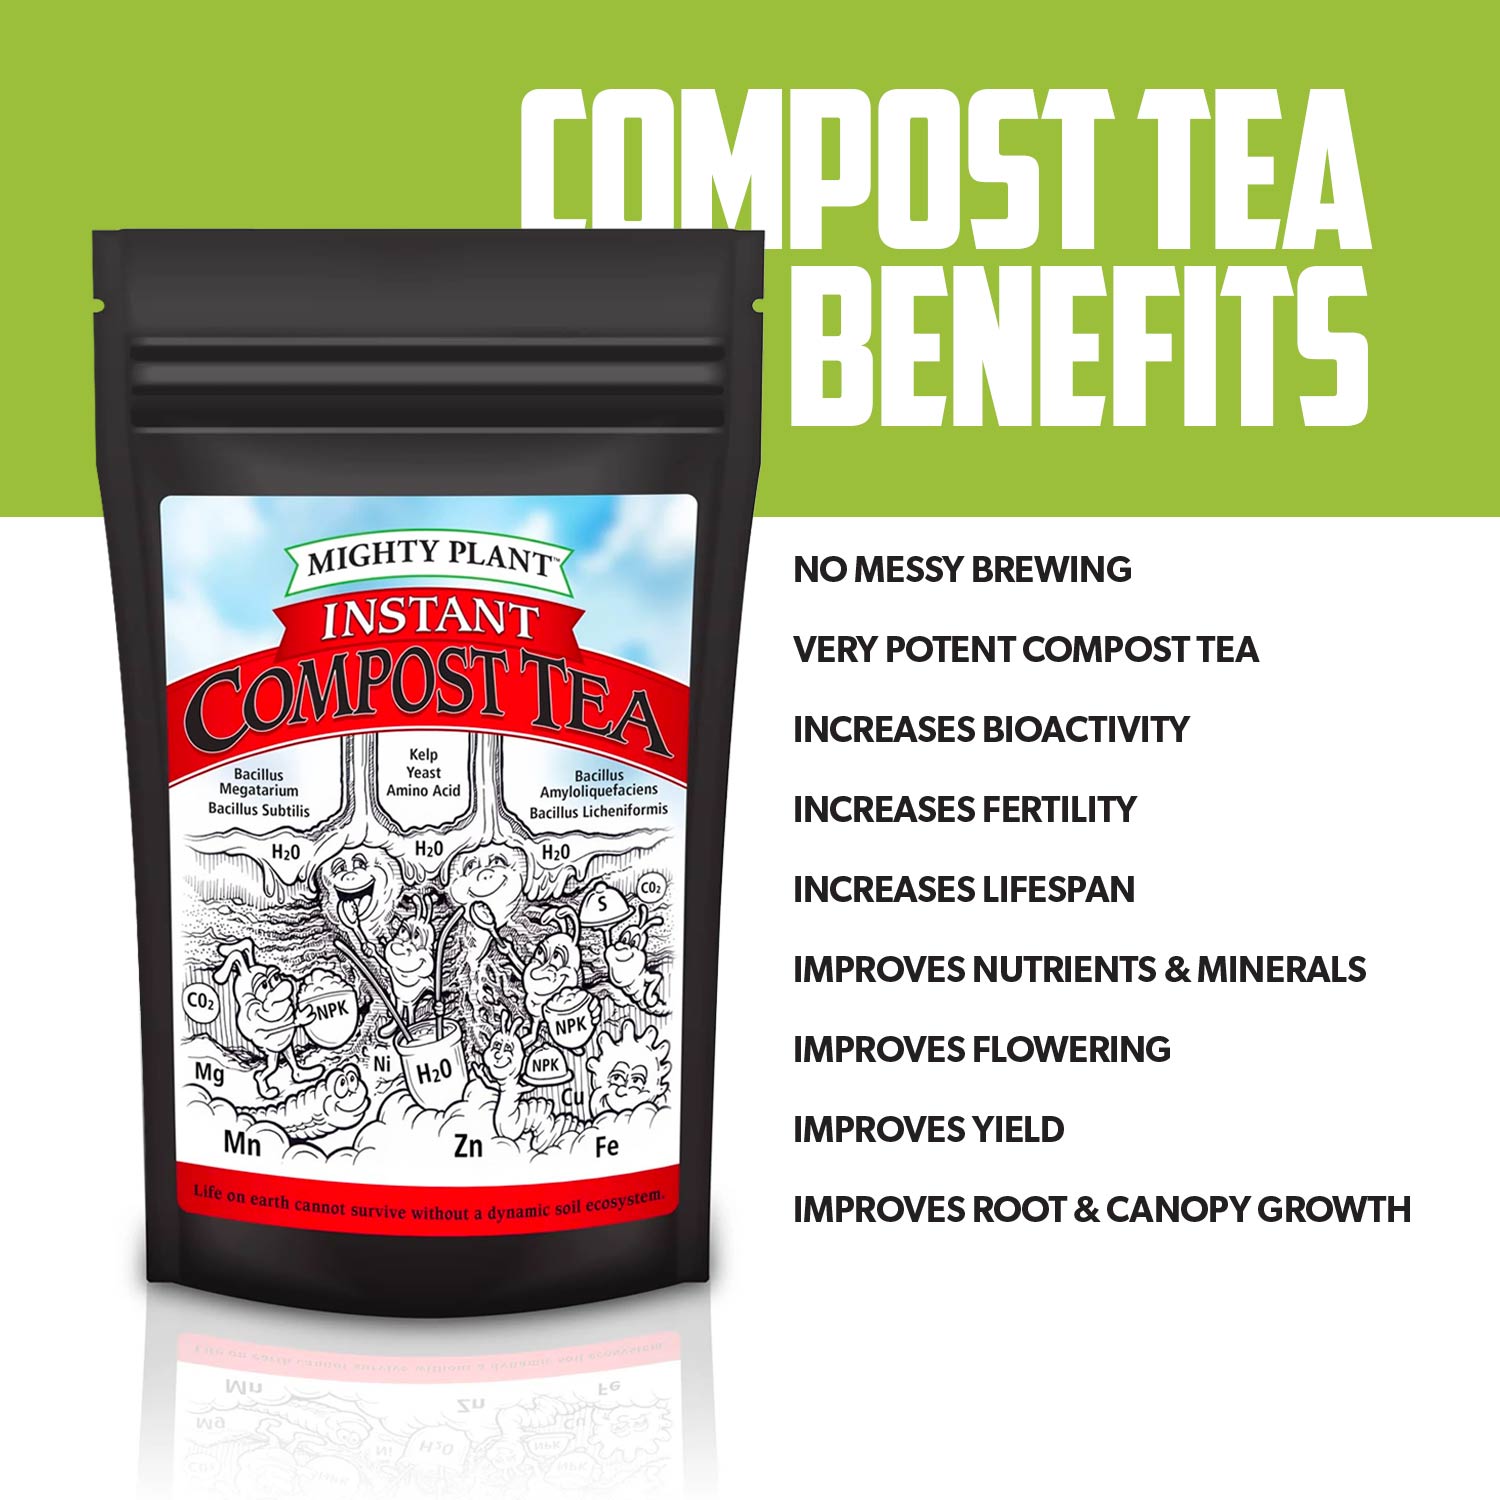 Grahpic of Instant Compost Tea showing benefits of using the product